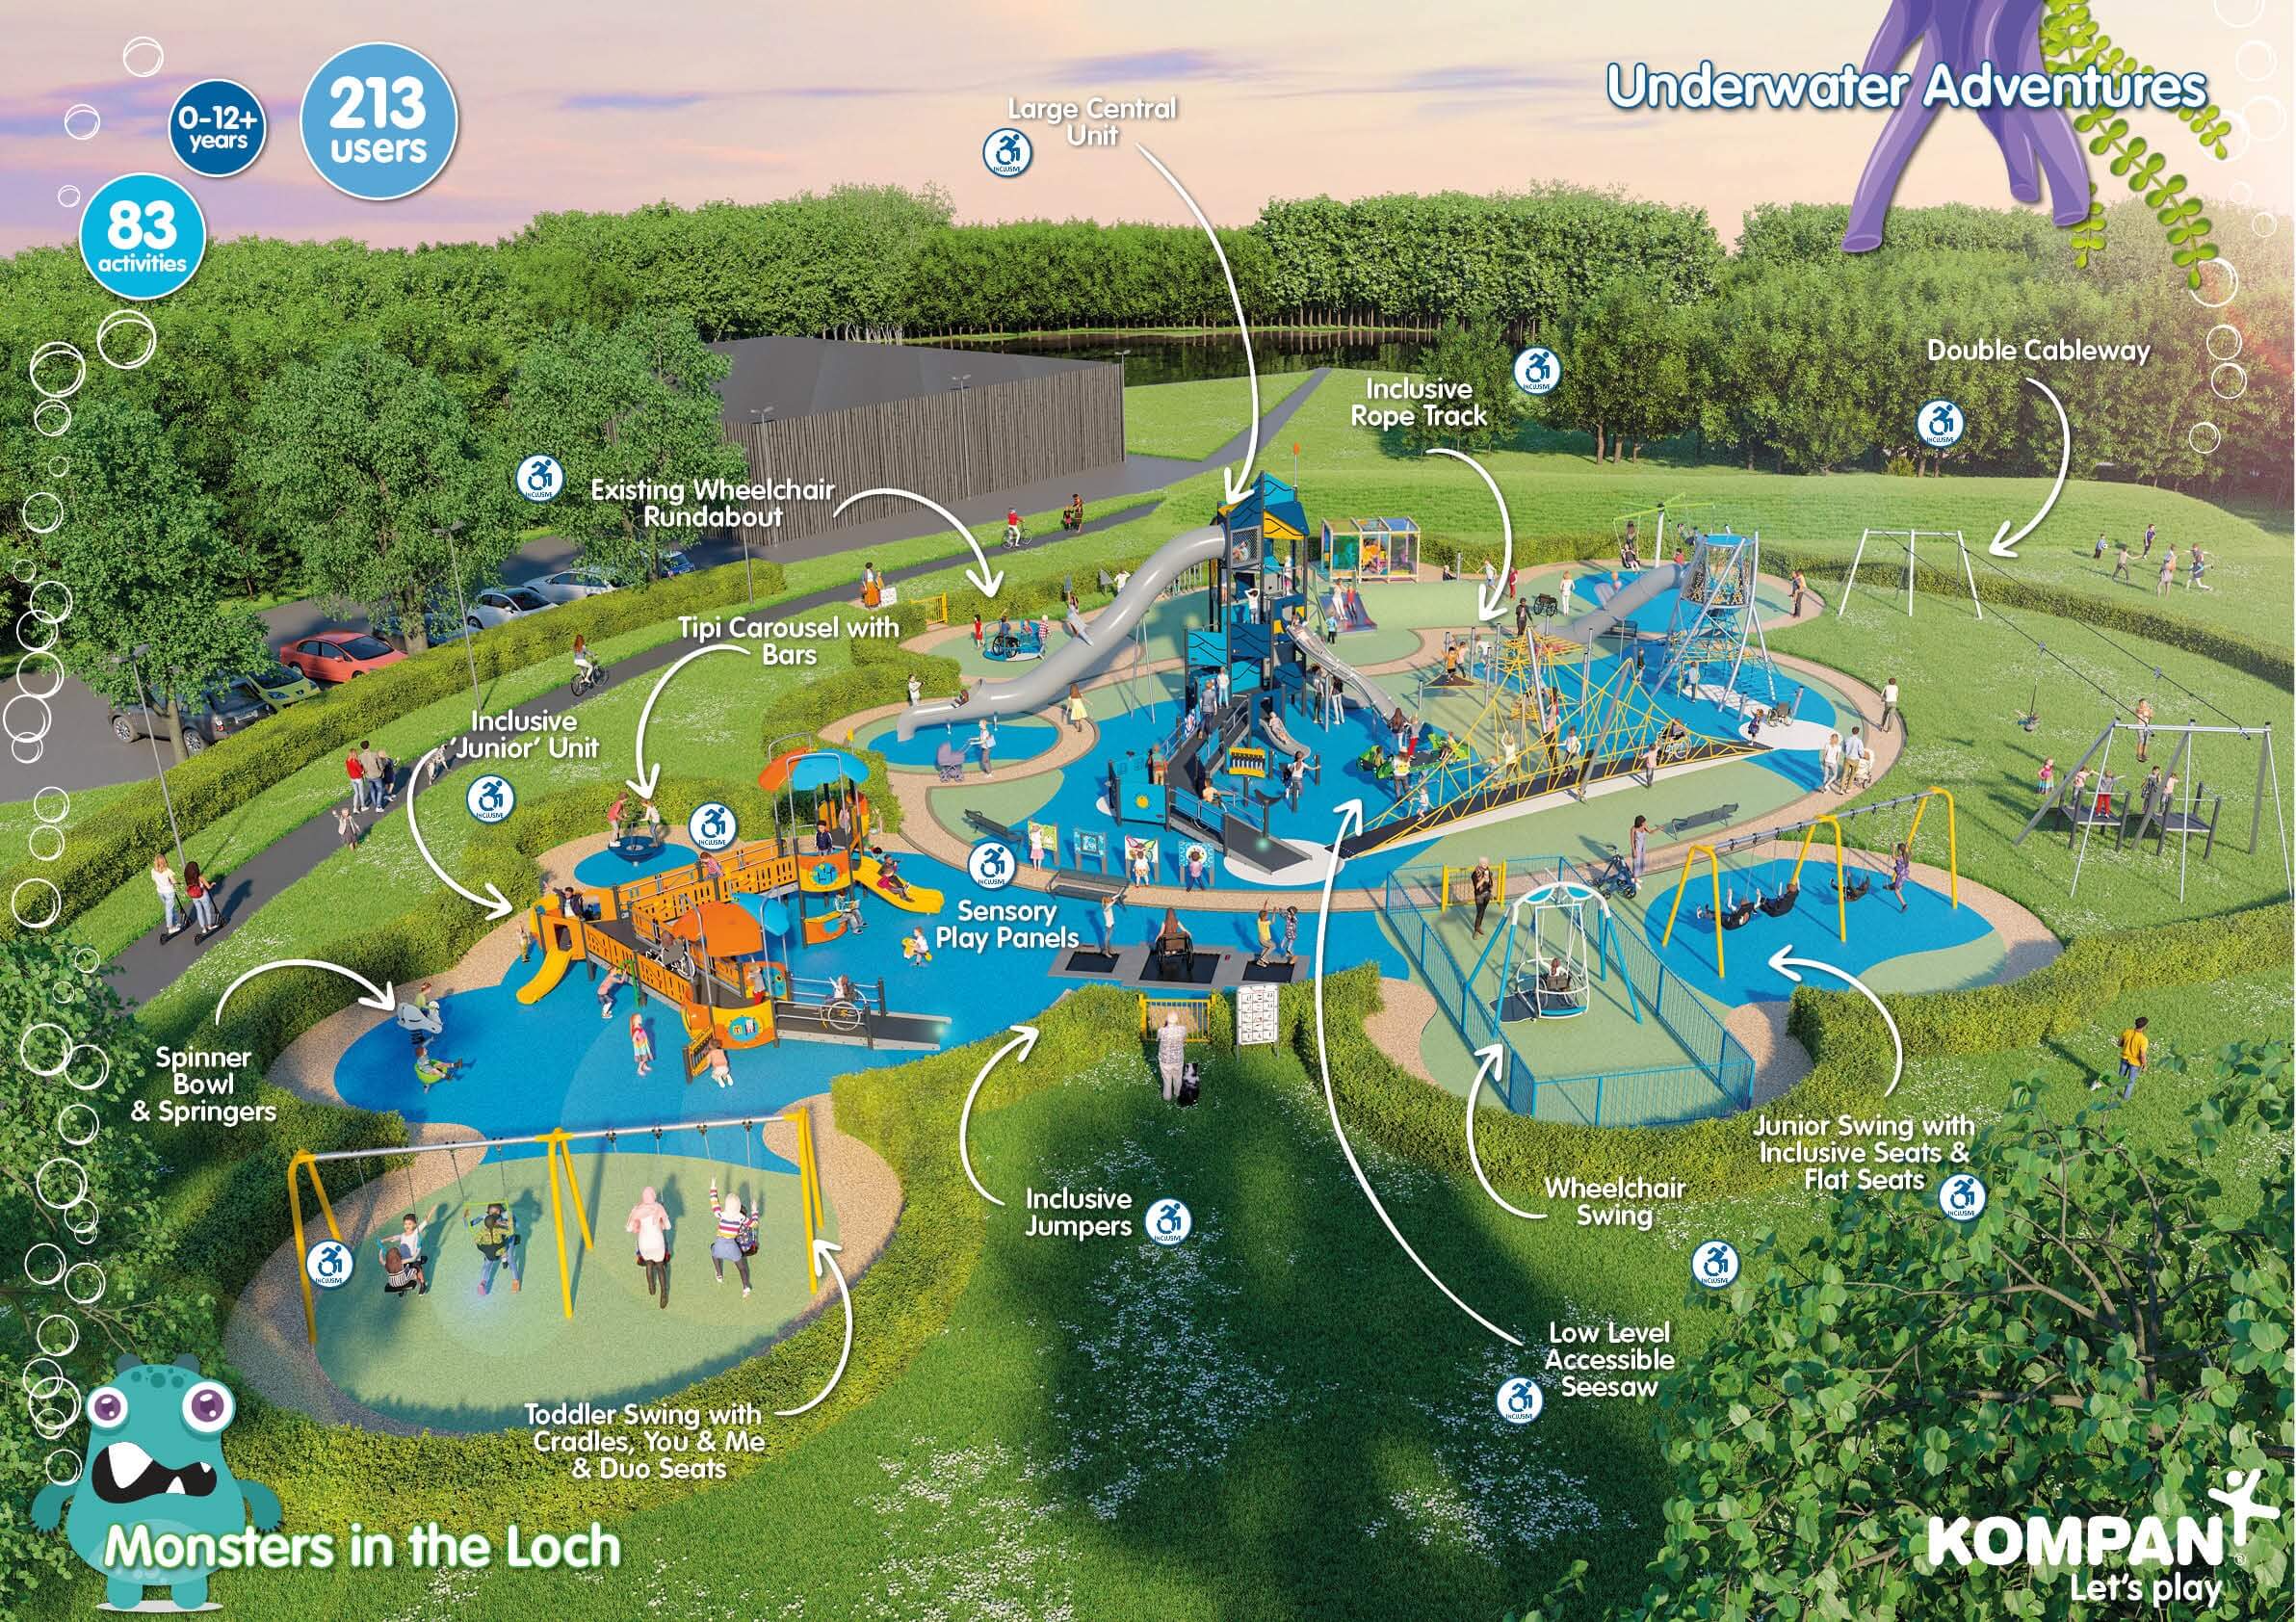 Design proposal of the new playpark layout and equipment